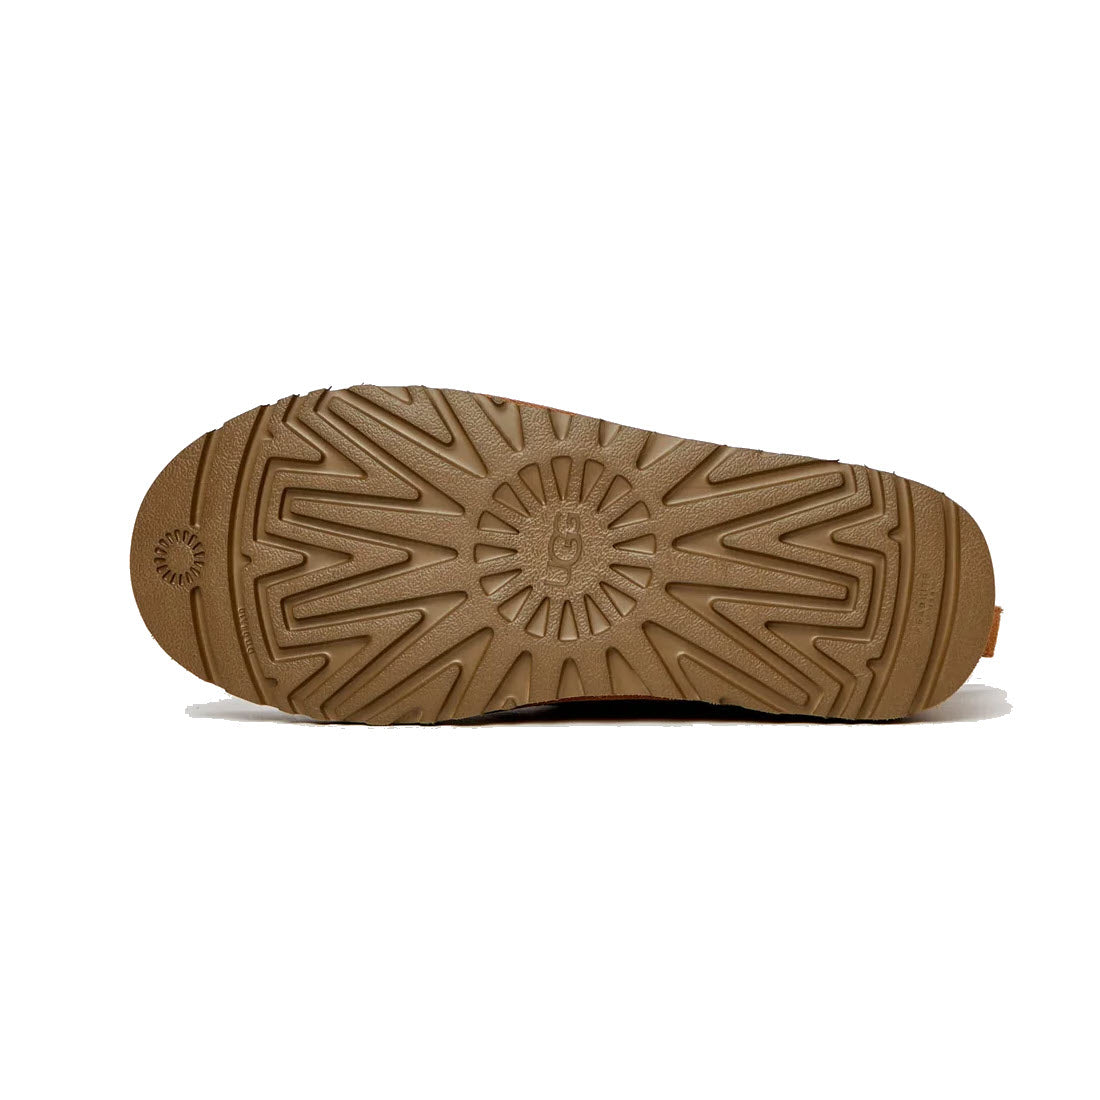 Sole of a tan UGG NEUMEL LACE INSULATED BOOT CHESTNUT - MENS shoe displaying a detailed tread pattern with a central circular design and radial lines.